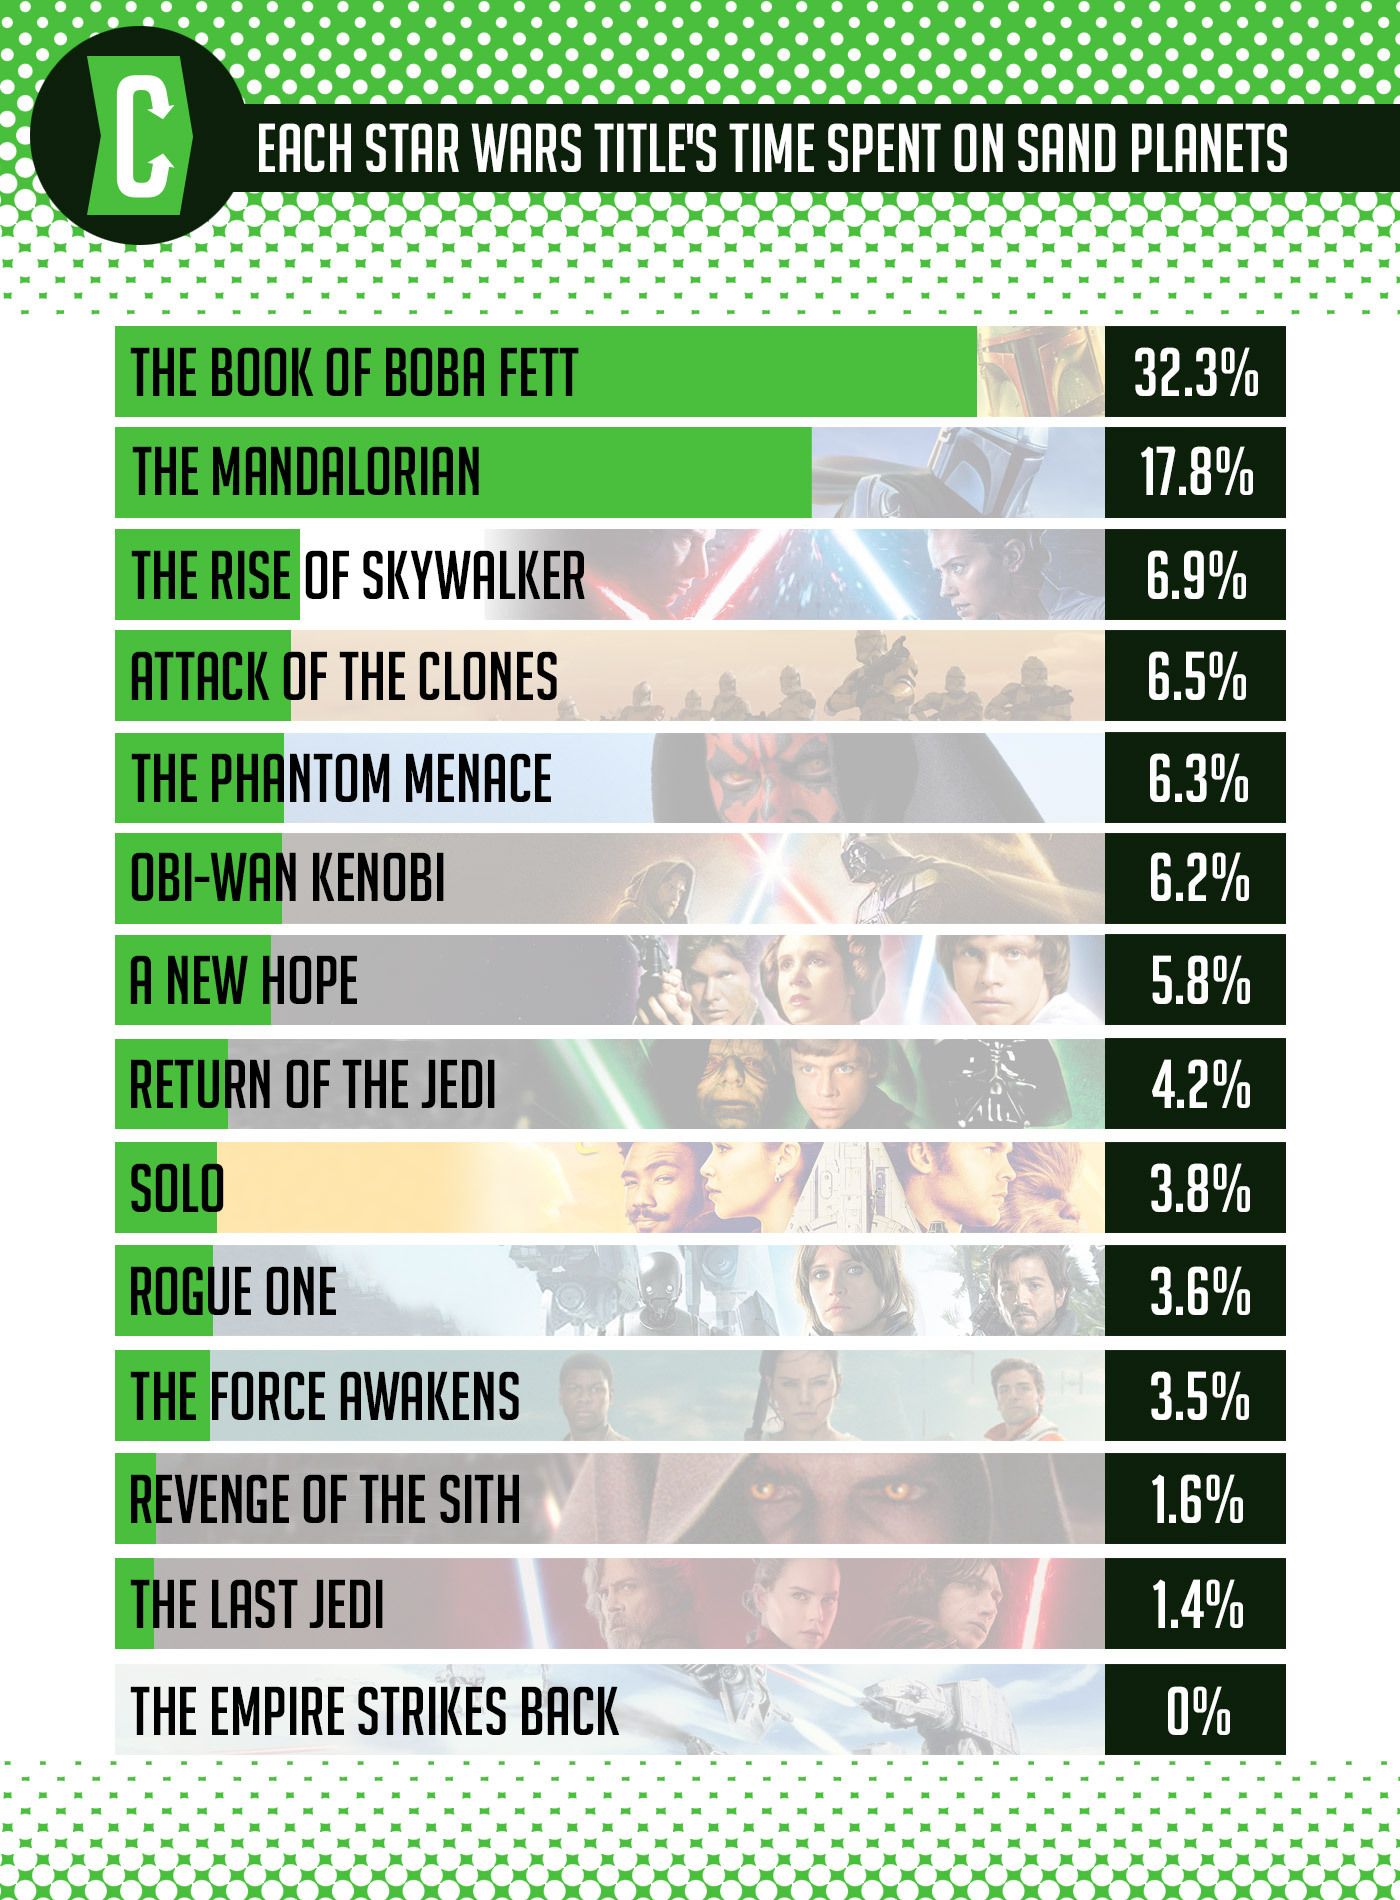 Infographic of the time spent on sand planets by each Star Wars series or movie